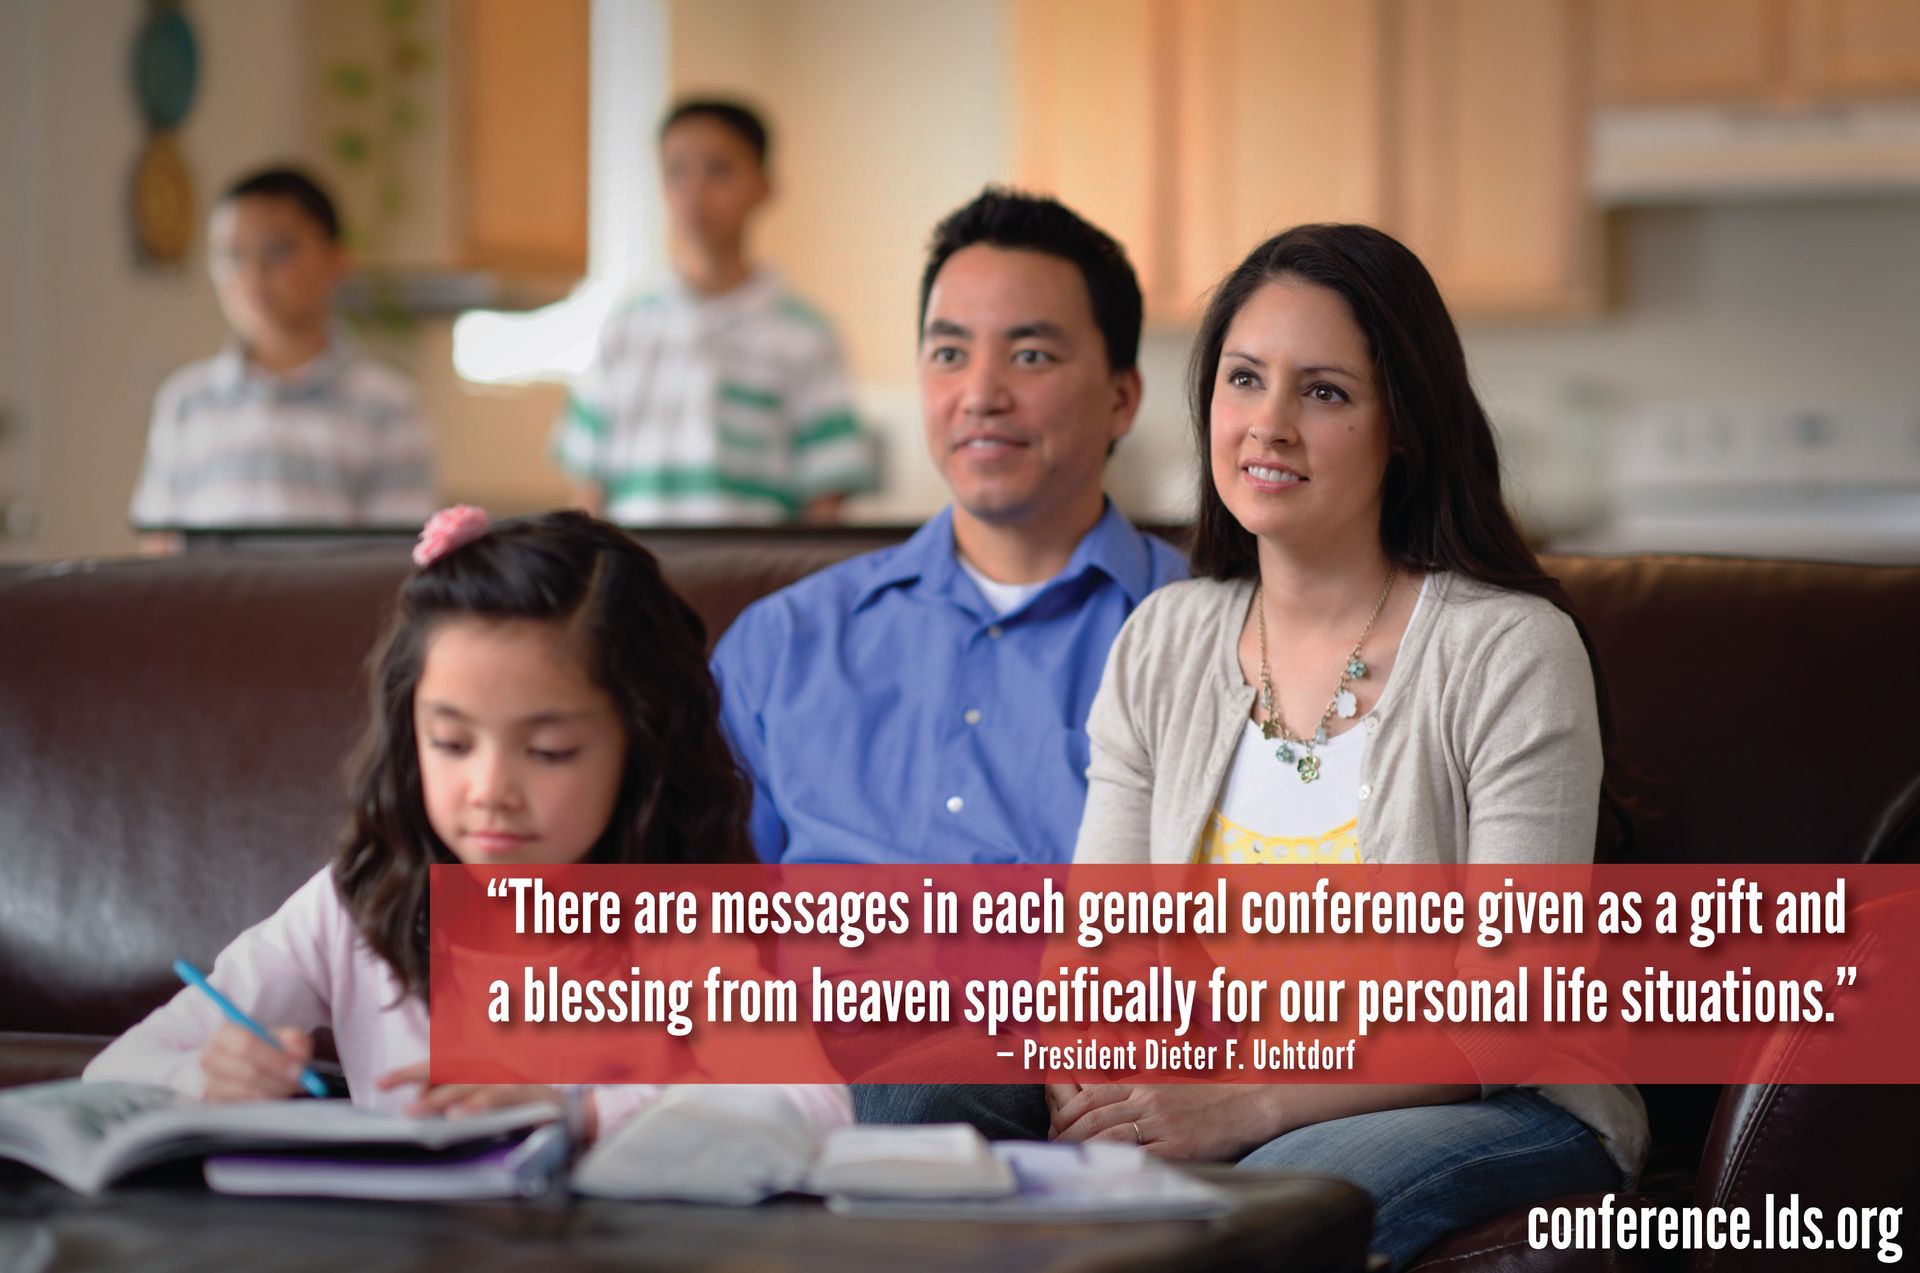 “There are messages in each general conference given as a gift and a blessing from heaven specifically for our personal life situations.”—President Dieter F. Uchtdorf, “General Conference—No Ordinary Blessing” © undefined ipCode 1.